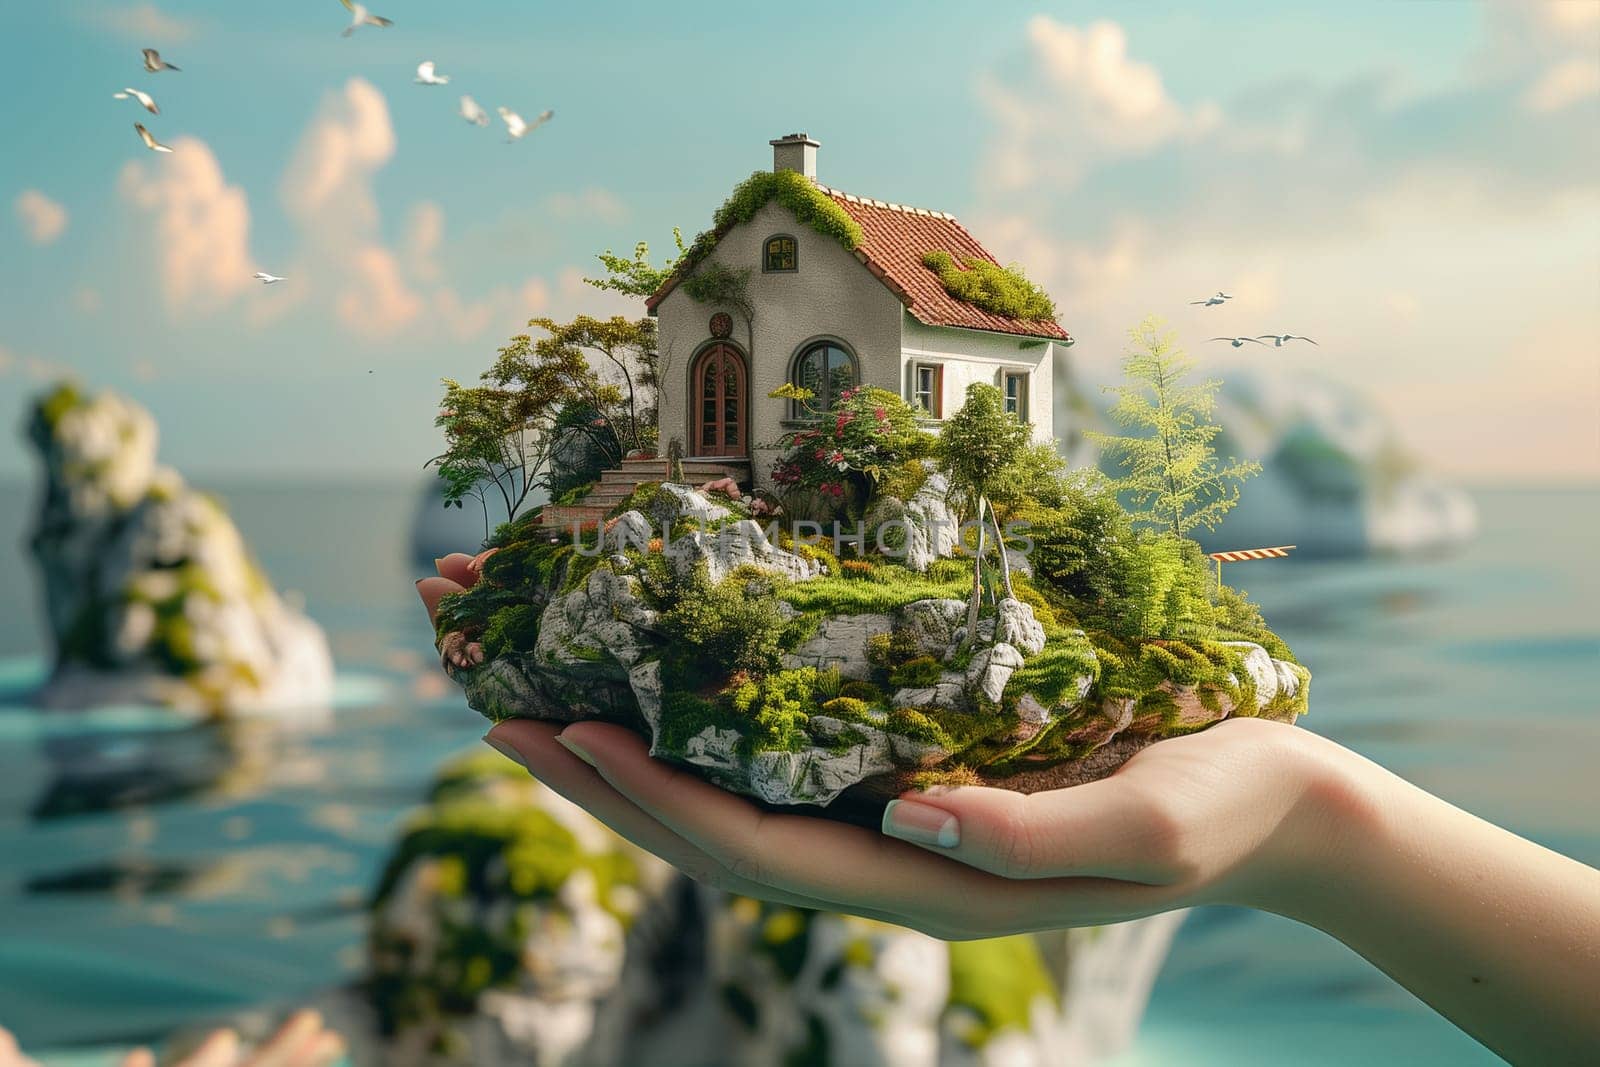 Person Holding Small House in Hands by Sd28DimoN_1976